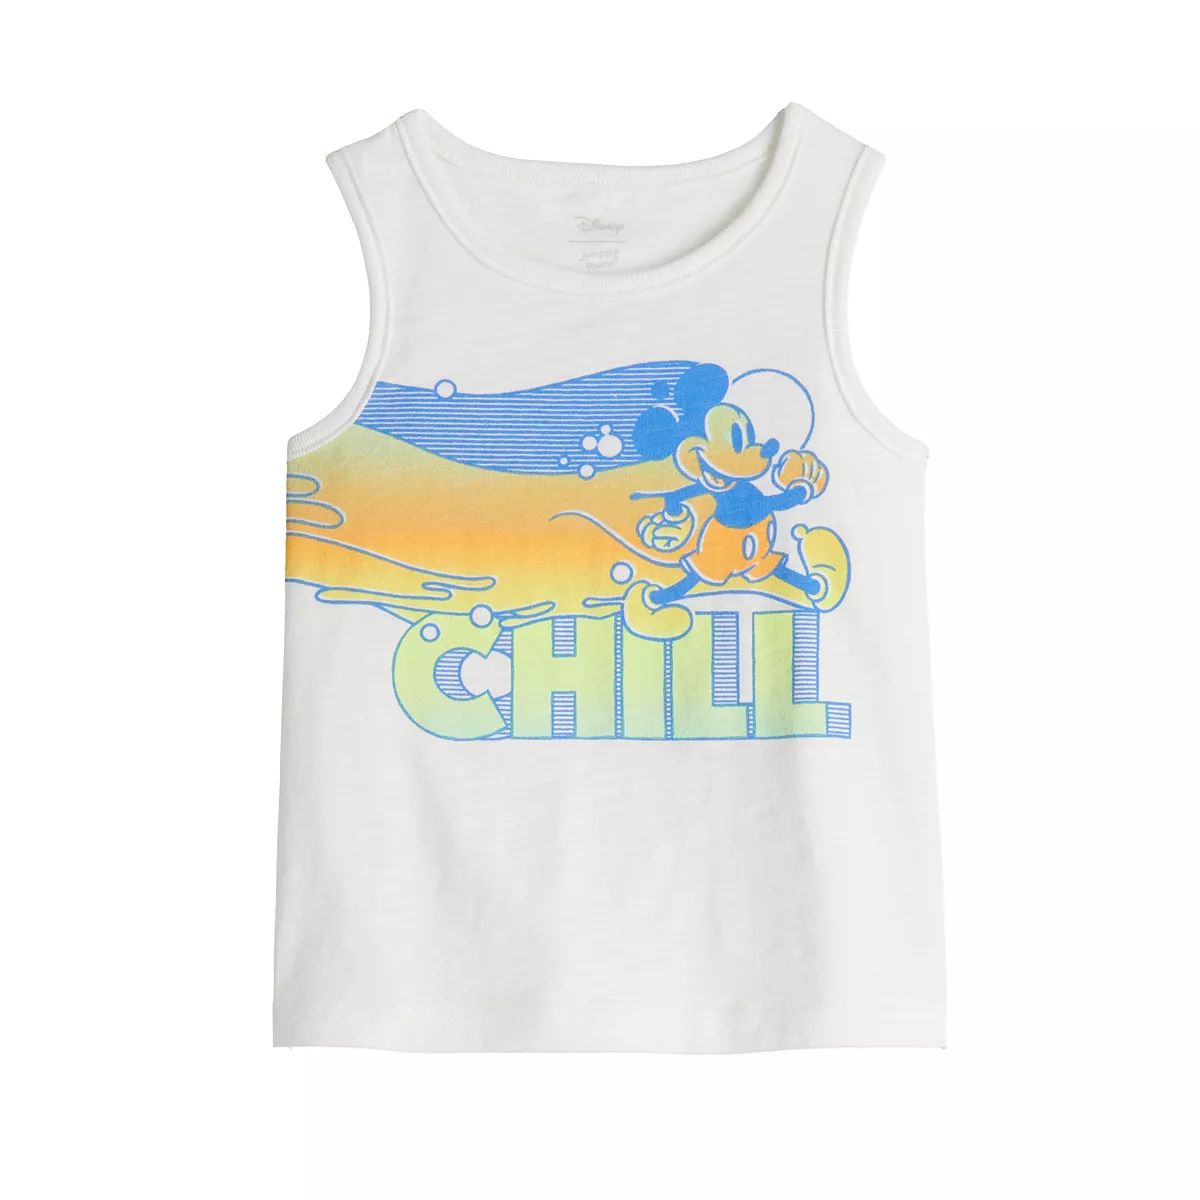 Toddler Boy Disney Mickey Mouse "Chill" Graphic Tank Top by Jumping Beans® | Kohl's